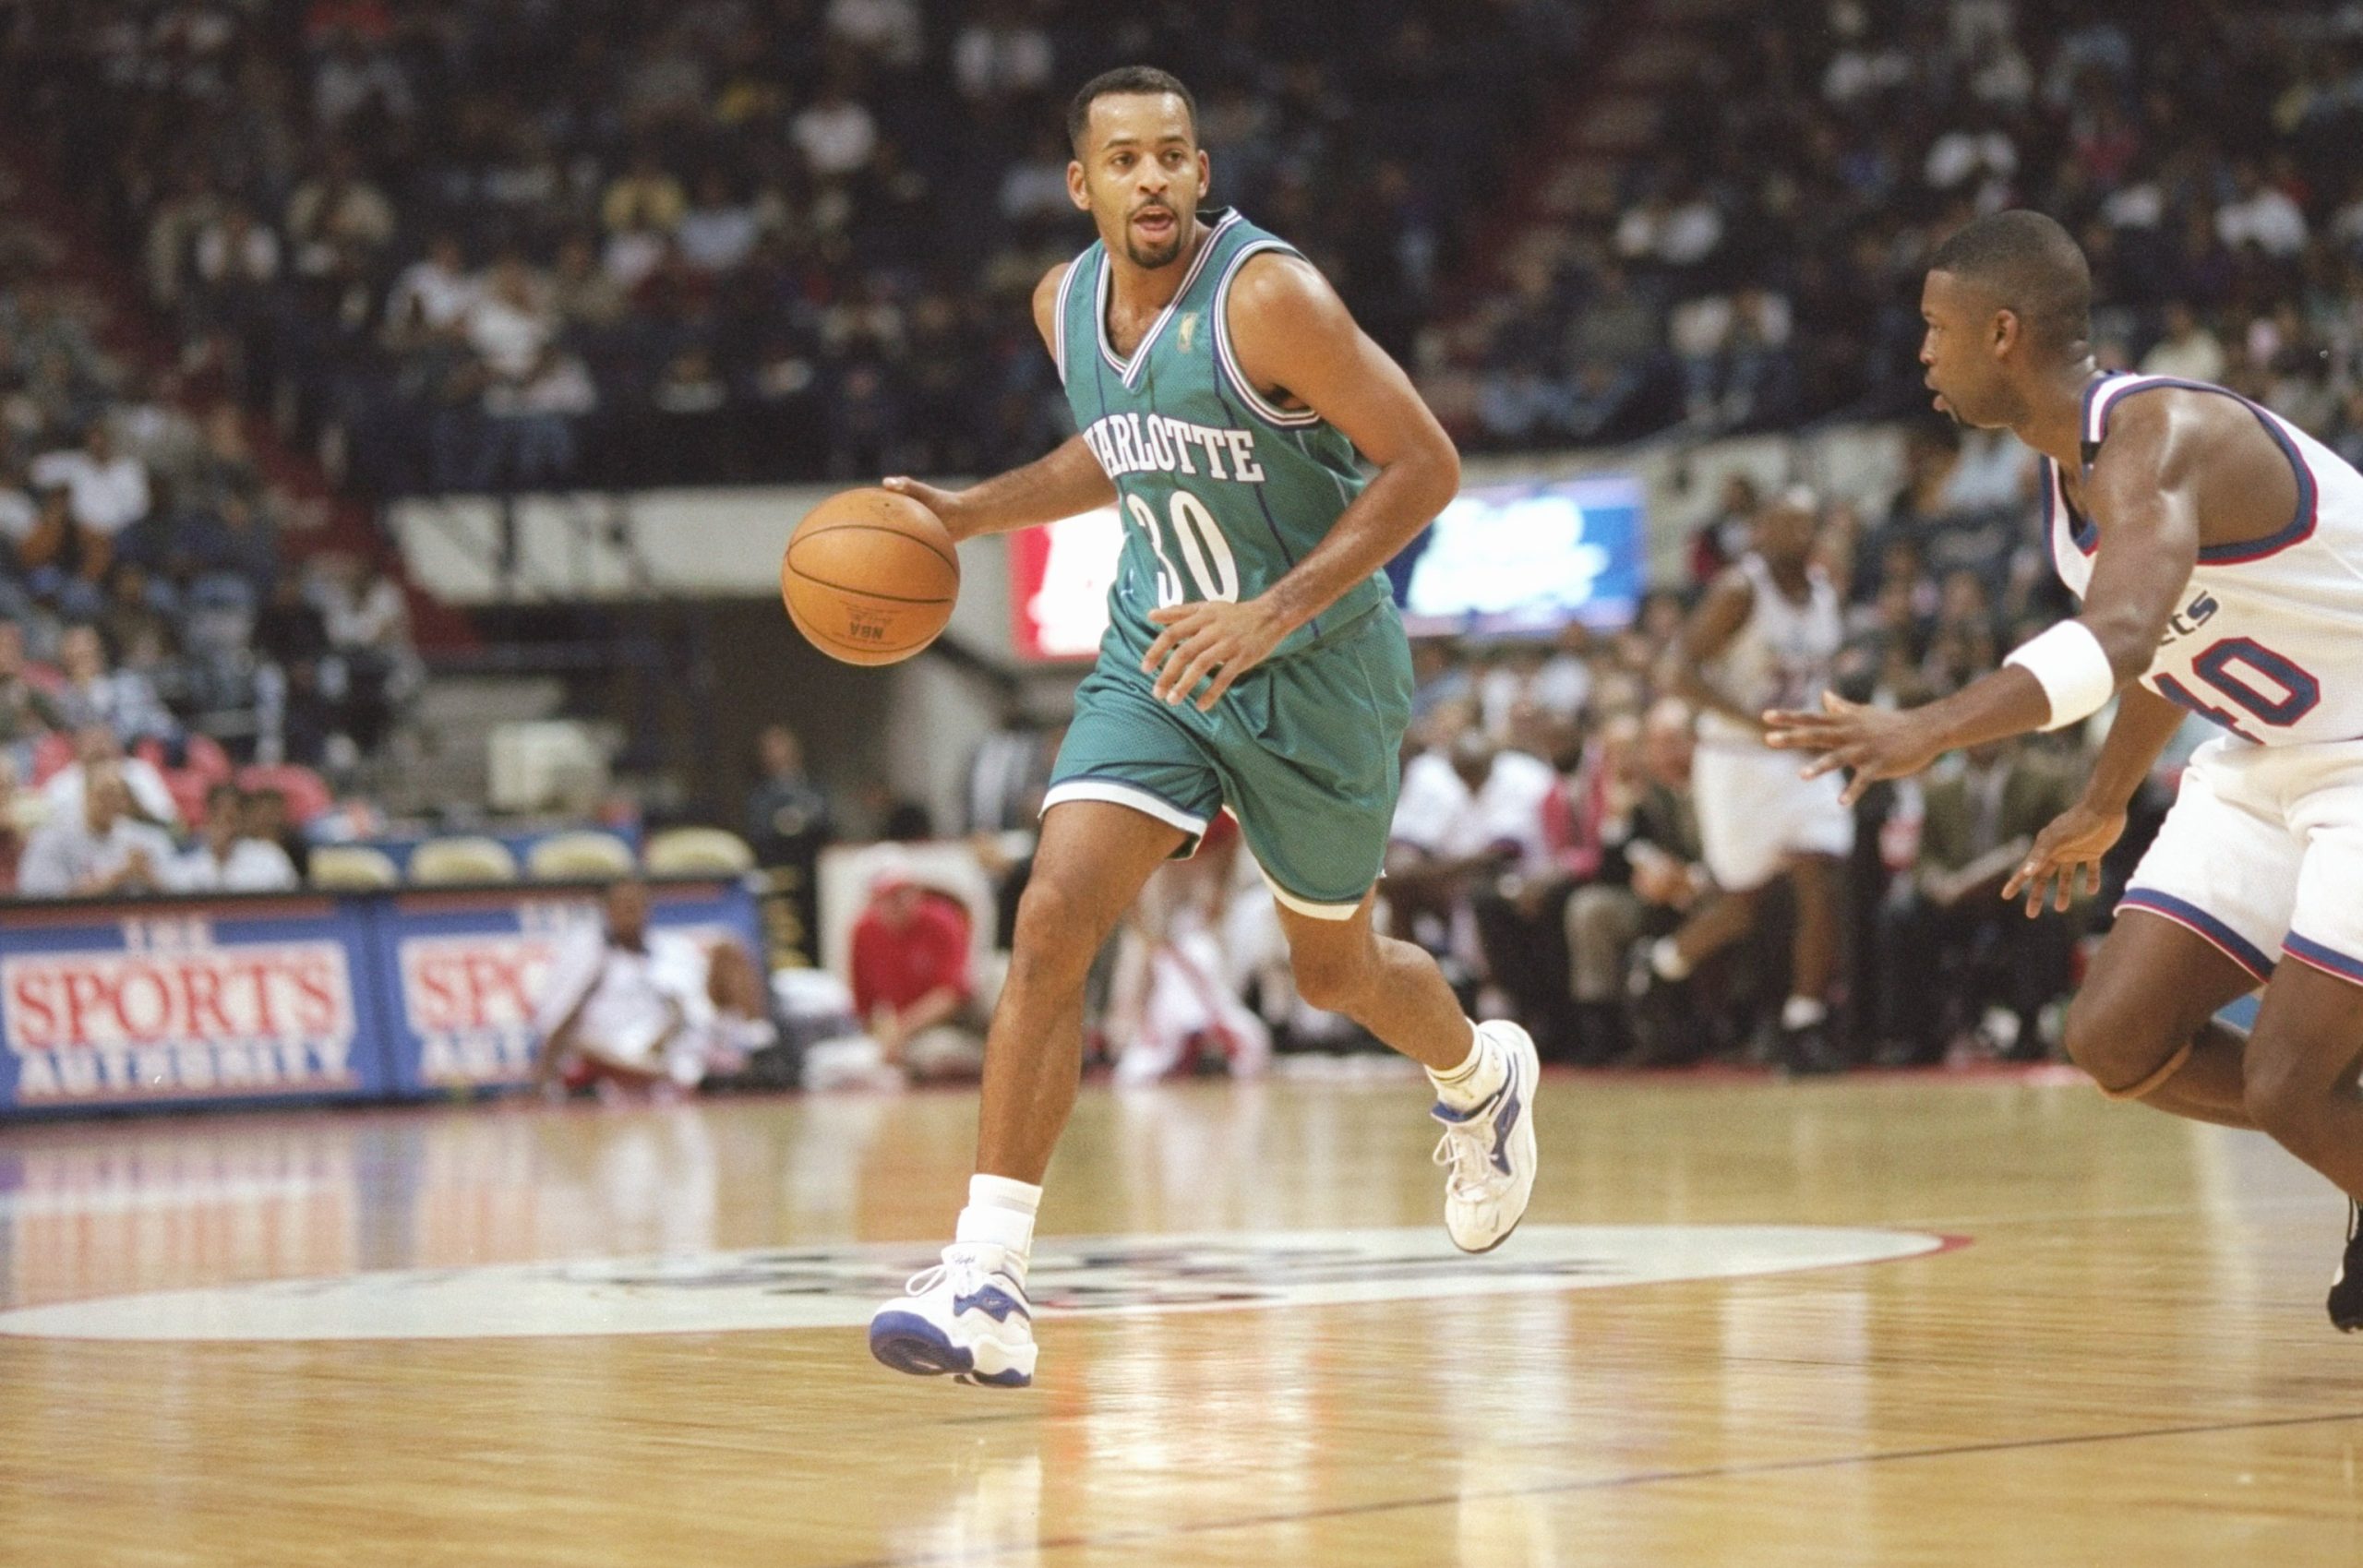 Guard Dell Curry of the Charlotte Hornets dribbles the ball down the court.